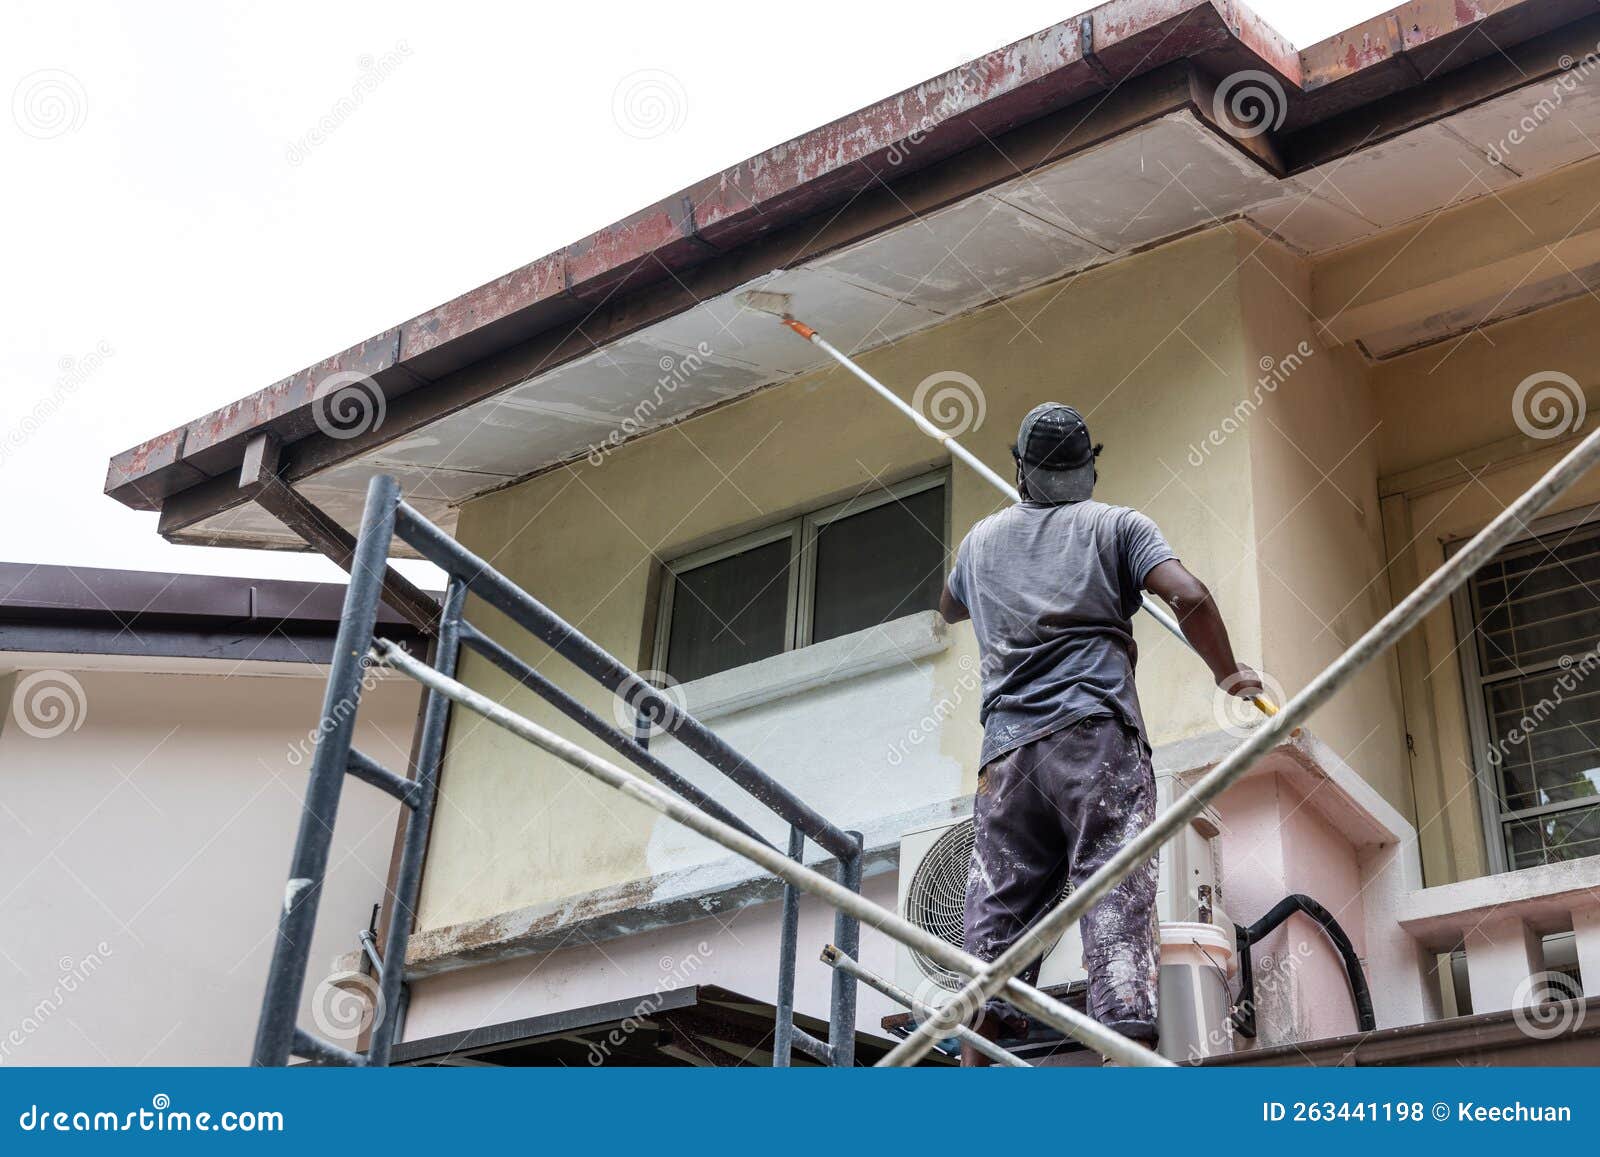 painter worker adding undercoat foundation paint onto ceiling with roller at residential building